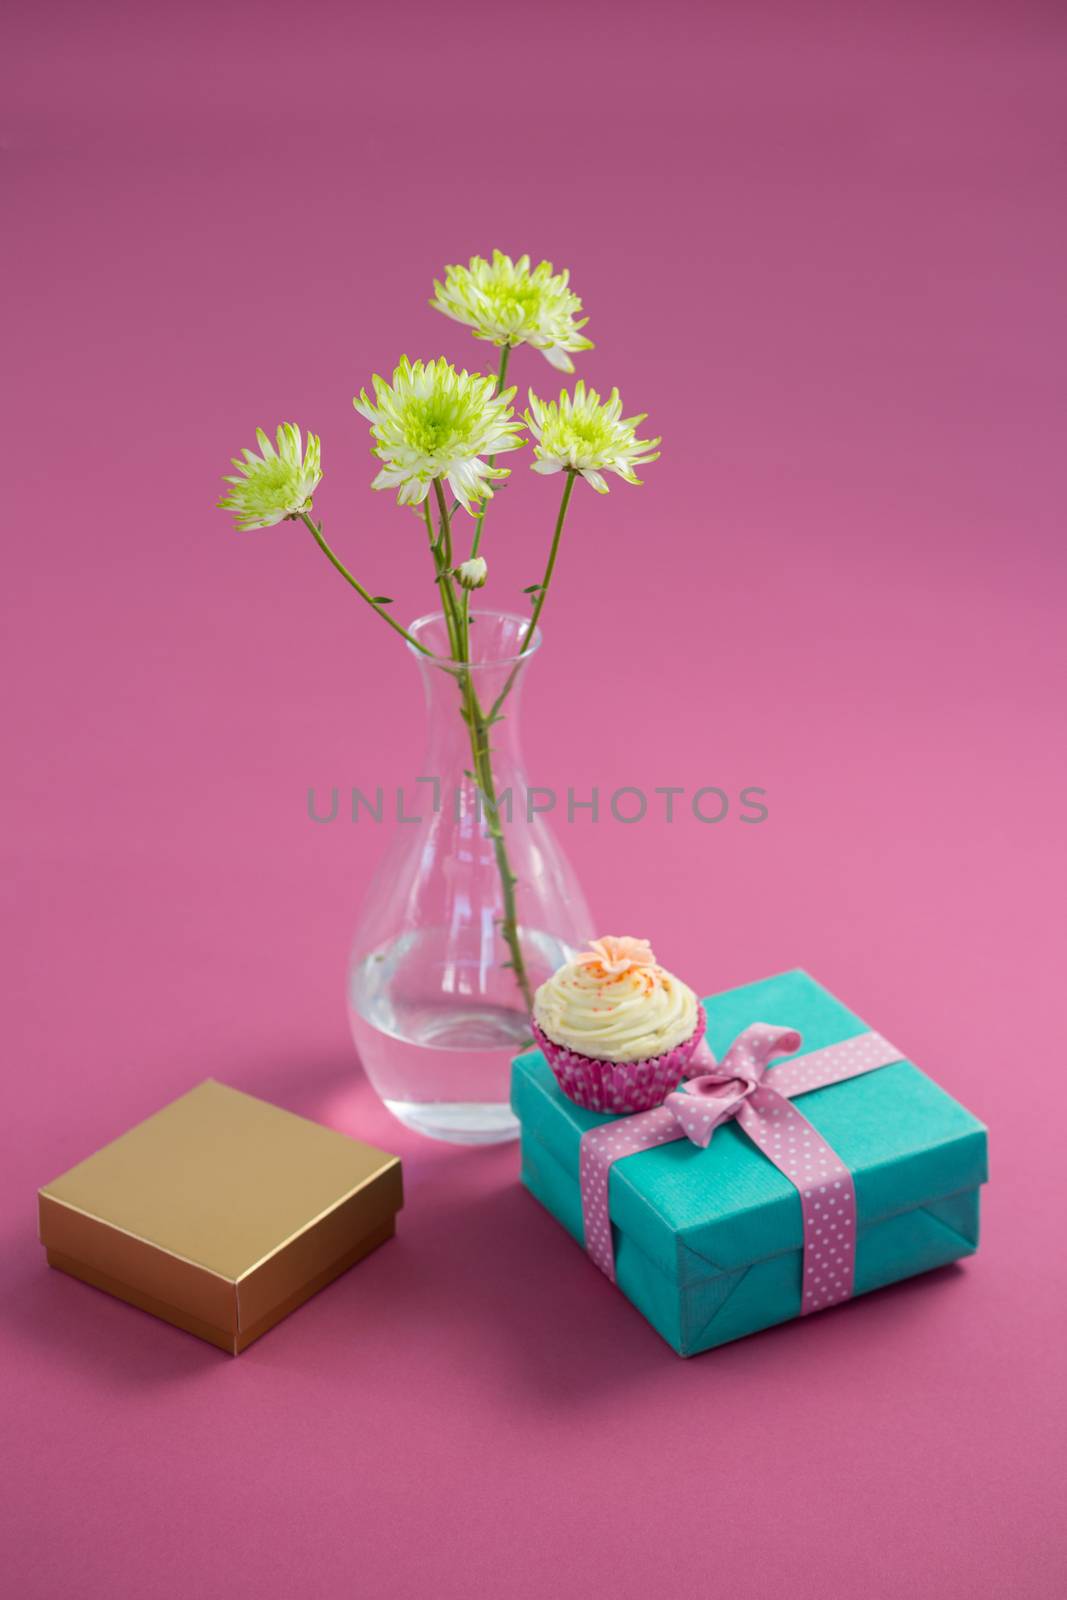 Flower vase and cupcake with gift boxes against pink background by Wavebreakmedia